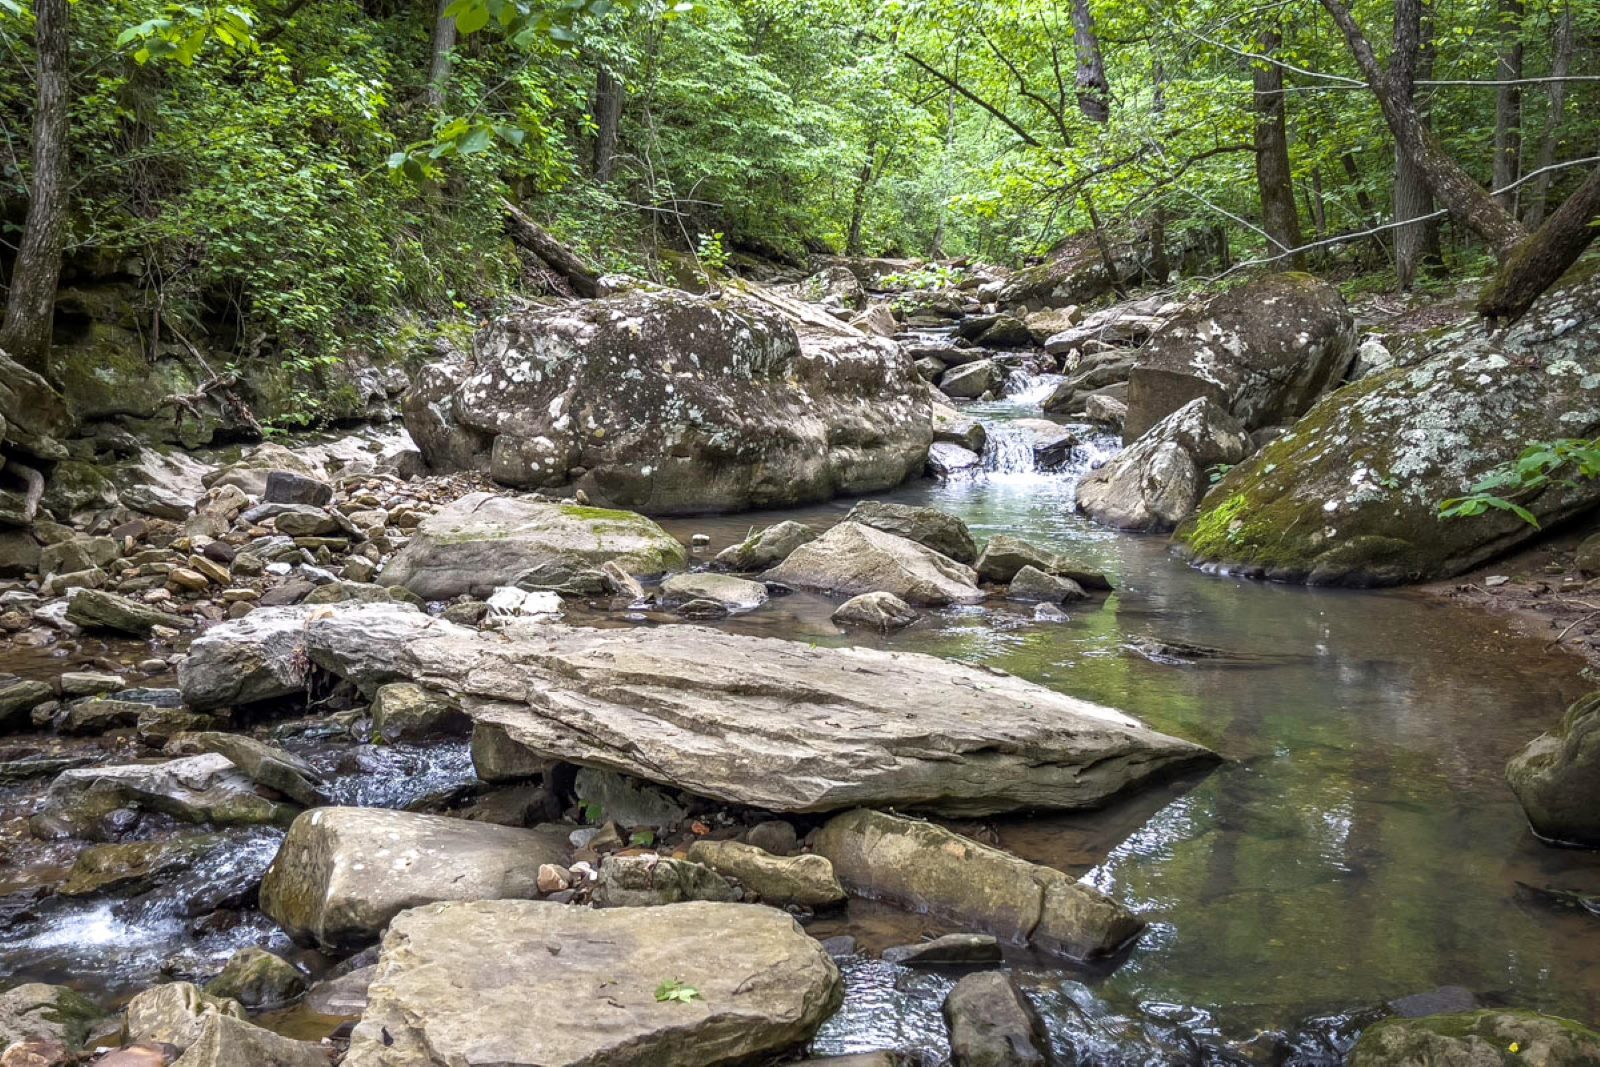 Scenes along the creek are more easily reached once the trail nears the base of the hollow before leading to Cecil Creek. (Photo by Sony Hocklander)